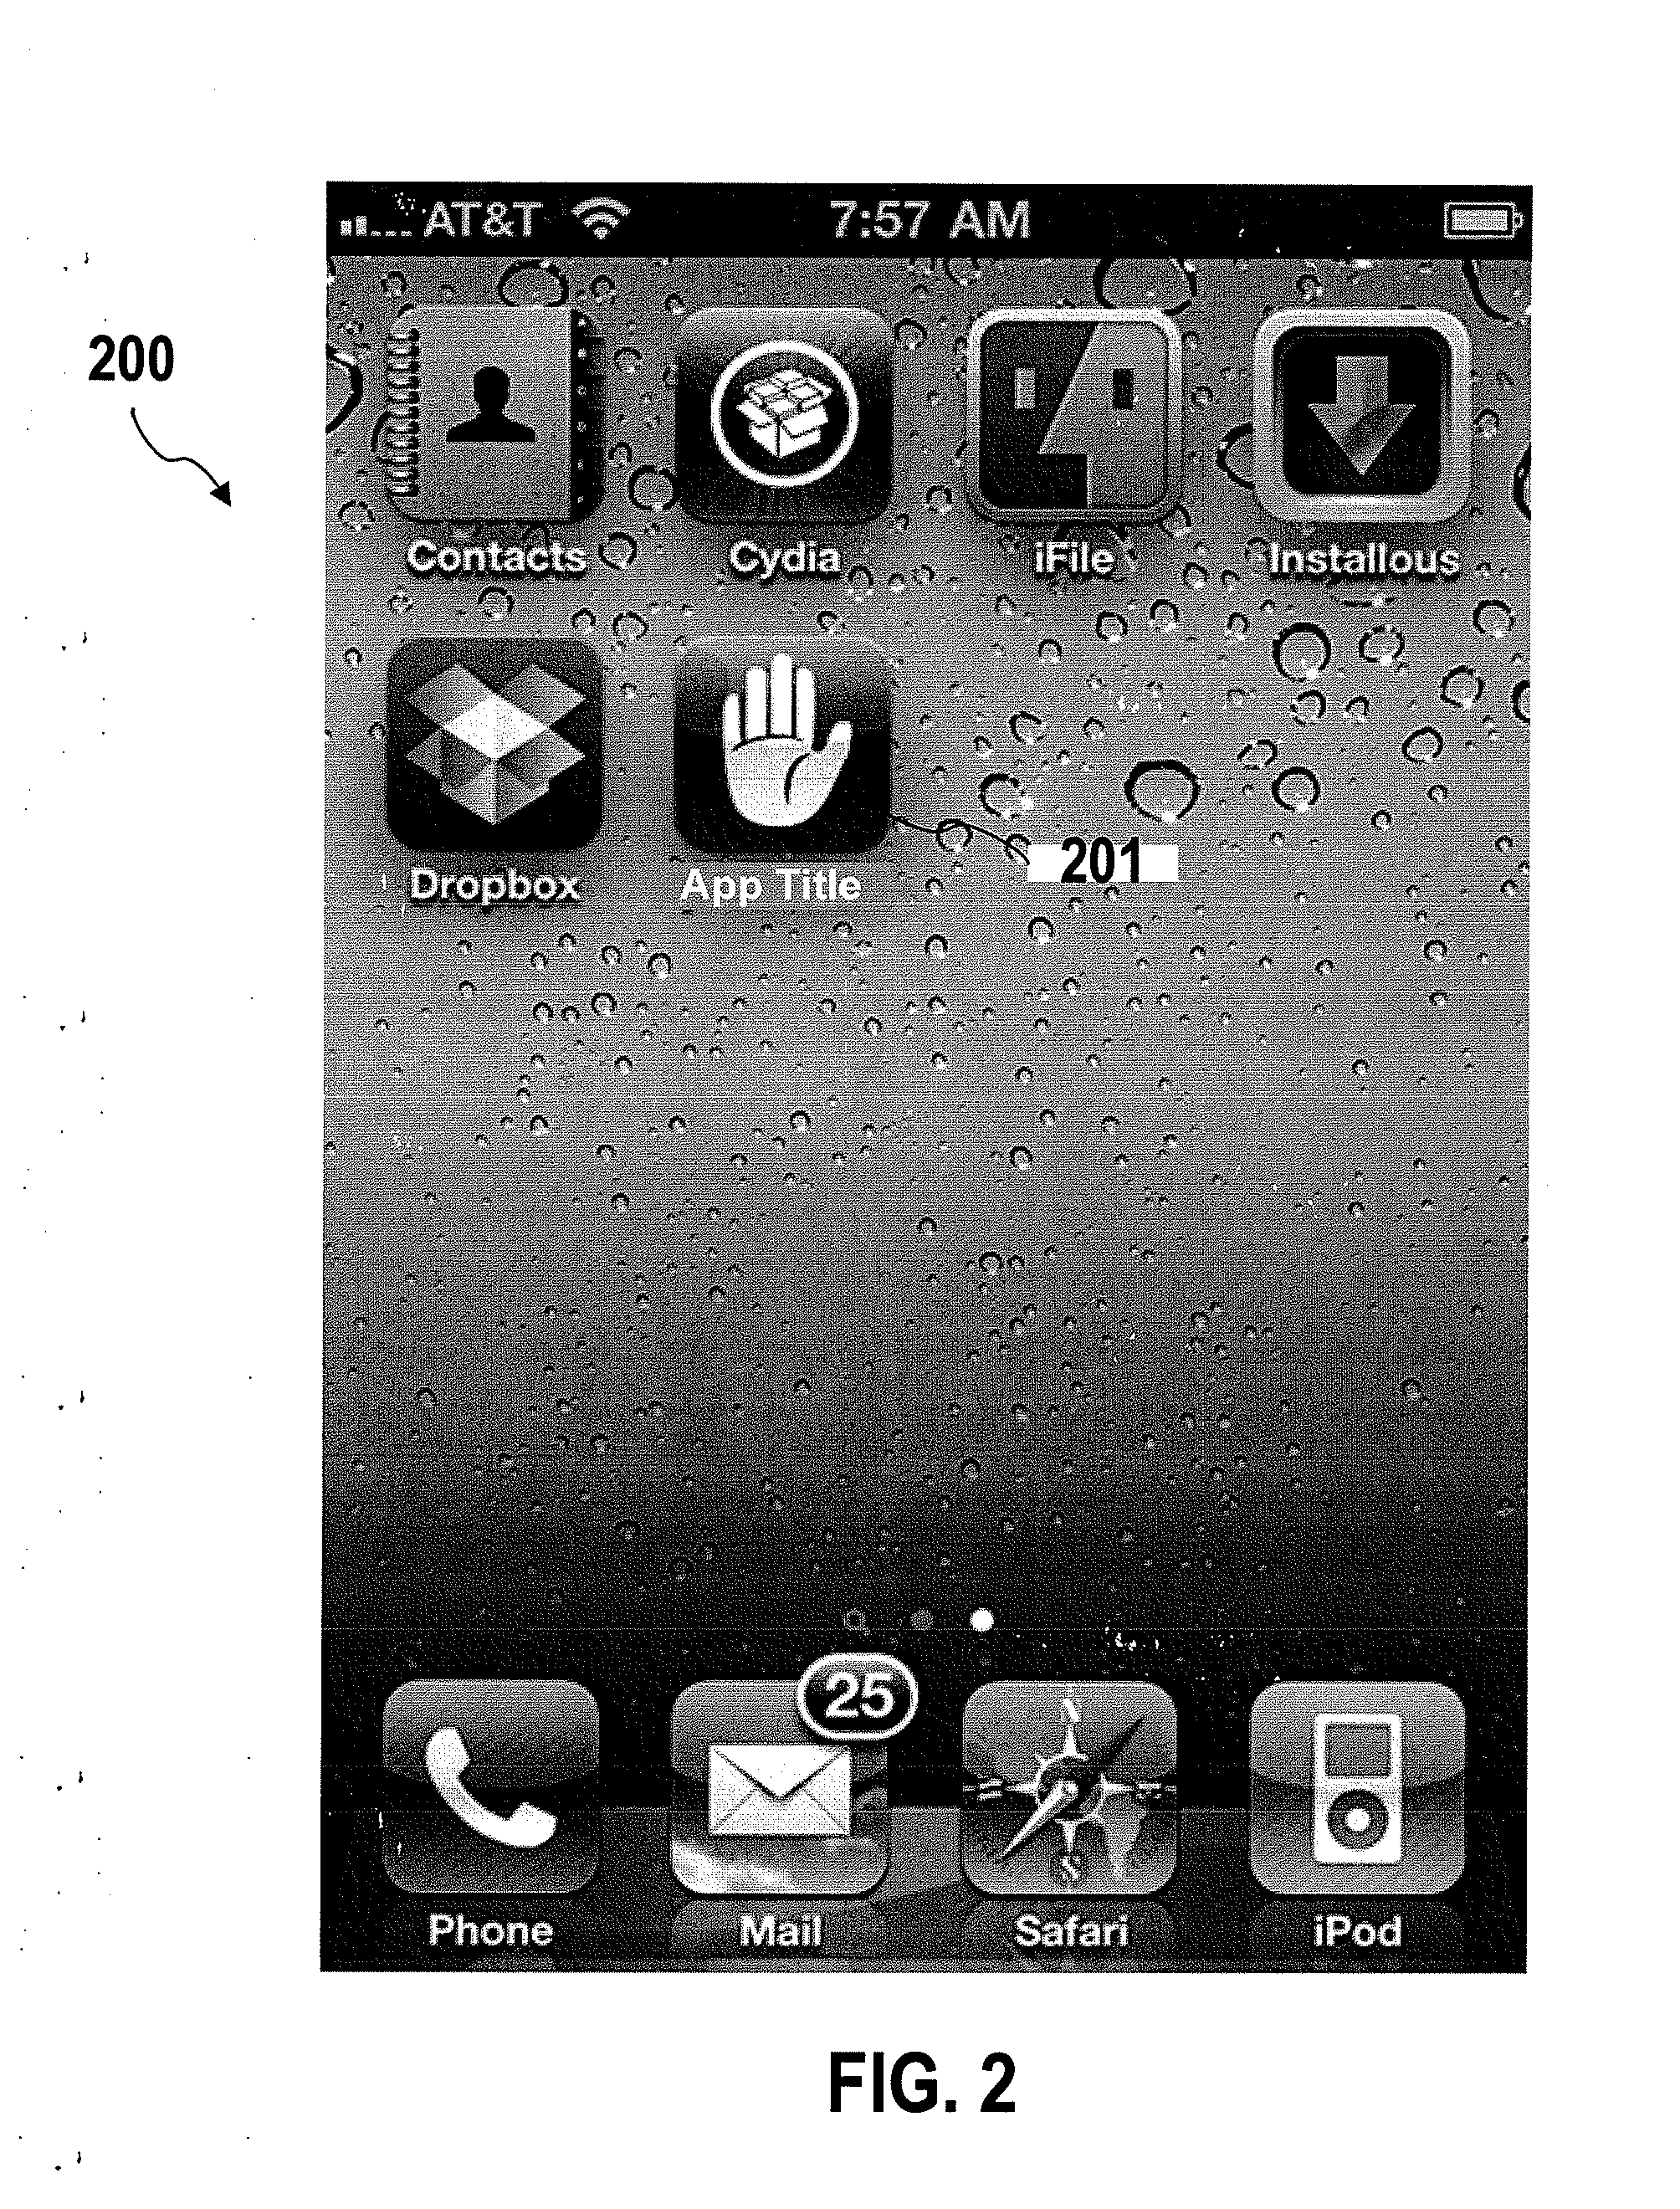 Method and system for communicating information associated with an incident and/or emergency situation